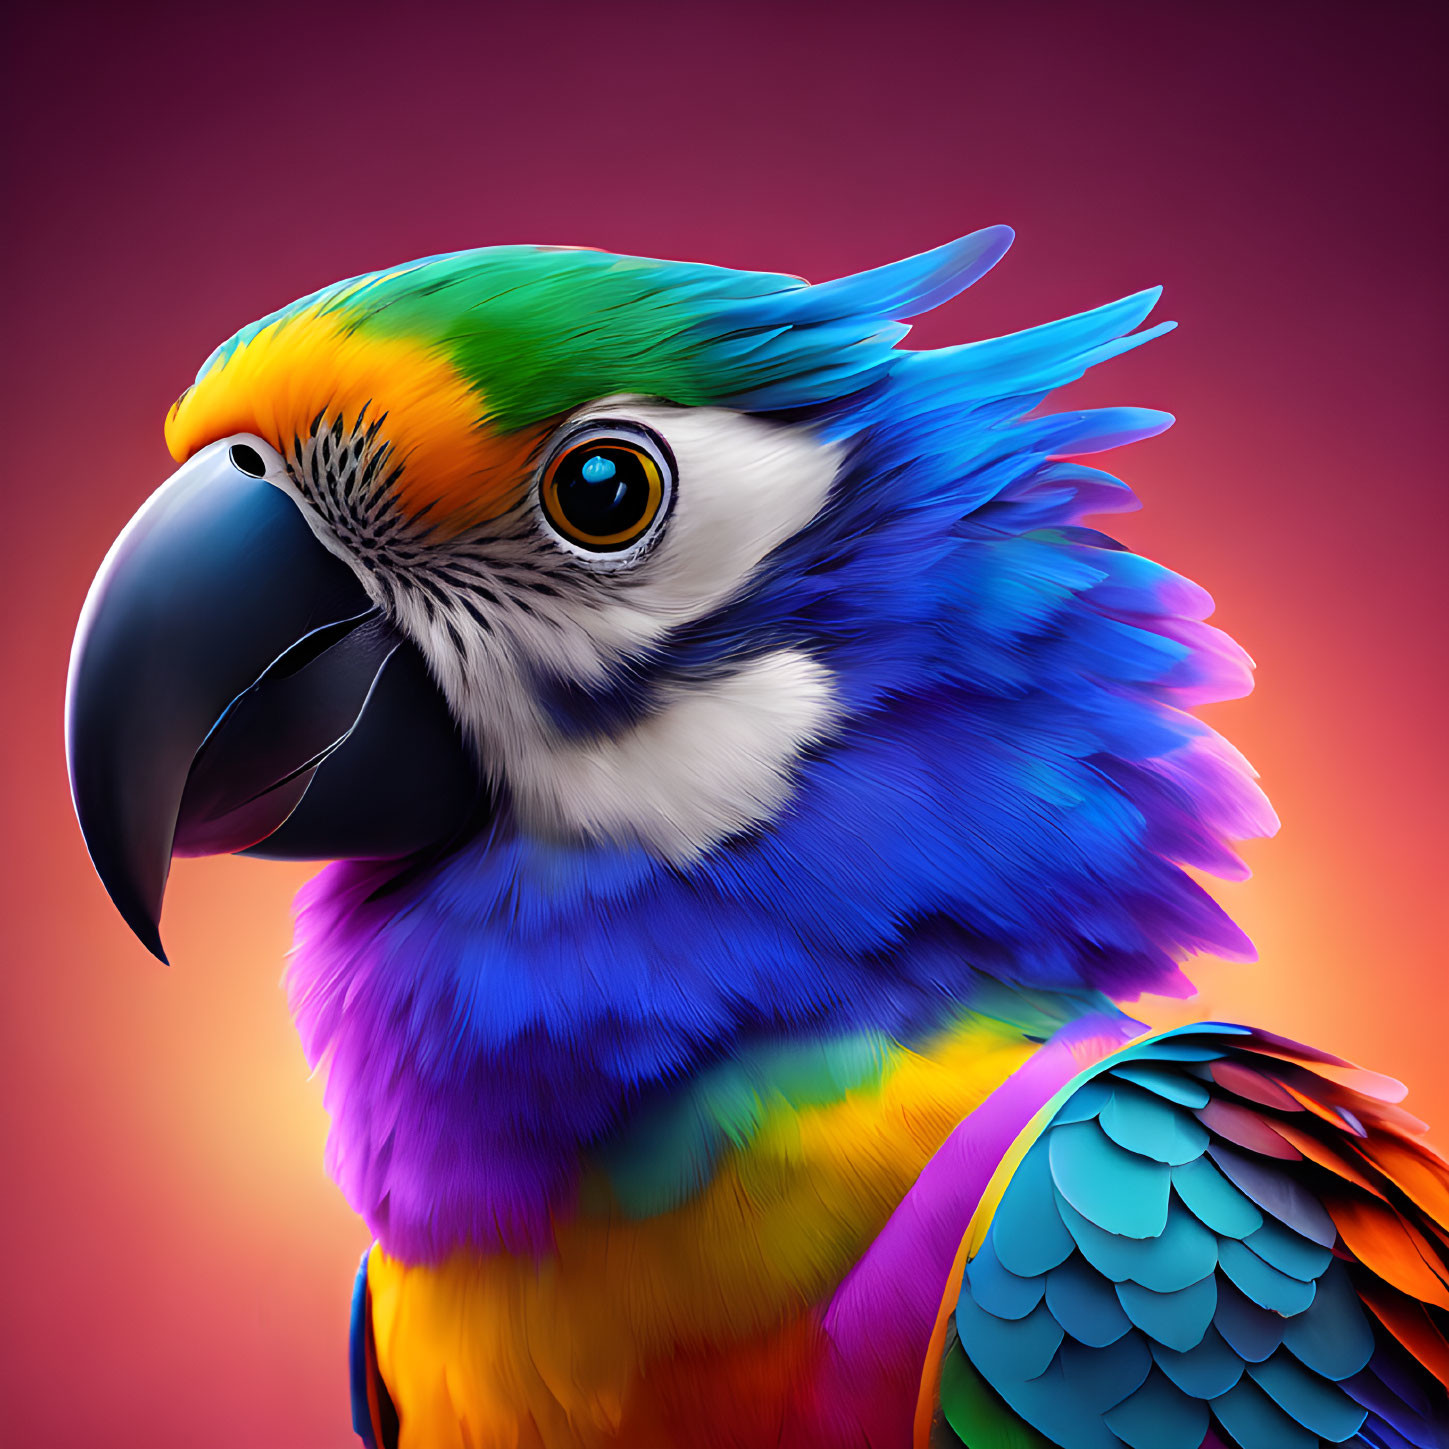 Colorful Macaw Parrot Illustration on Pink Background